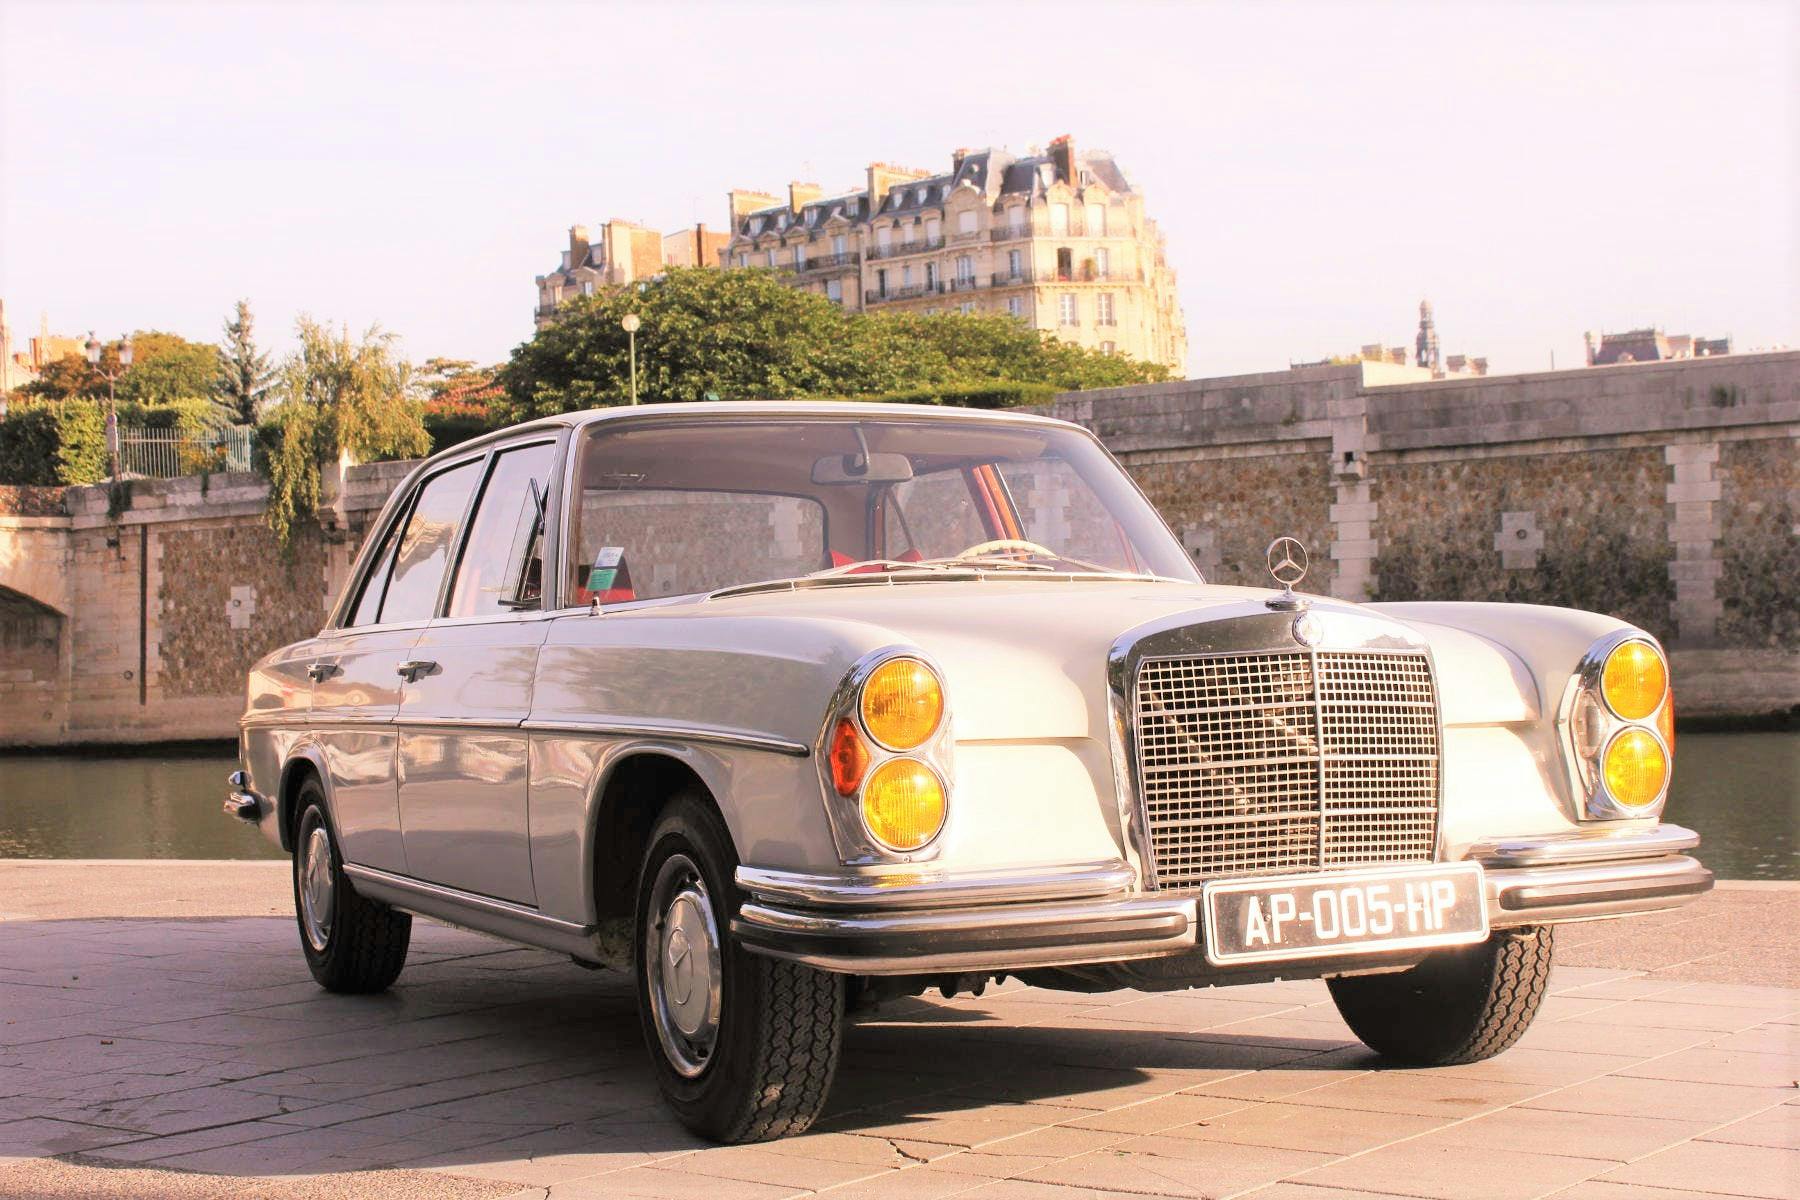 Guided tour of Paris in a collection car with wine tasting